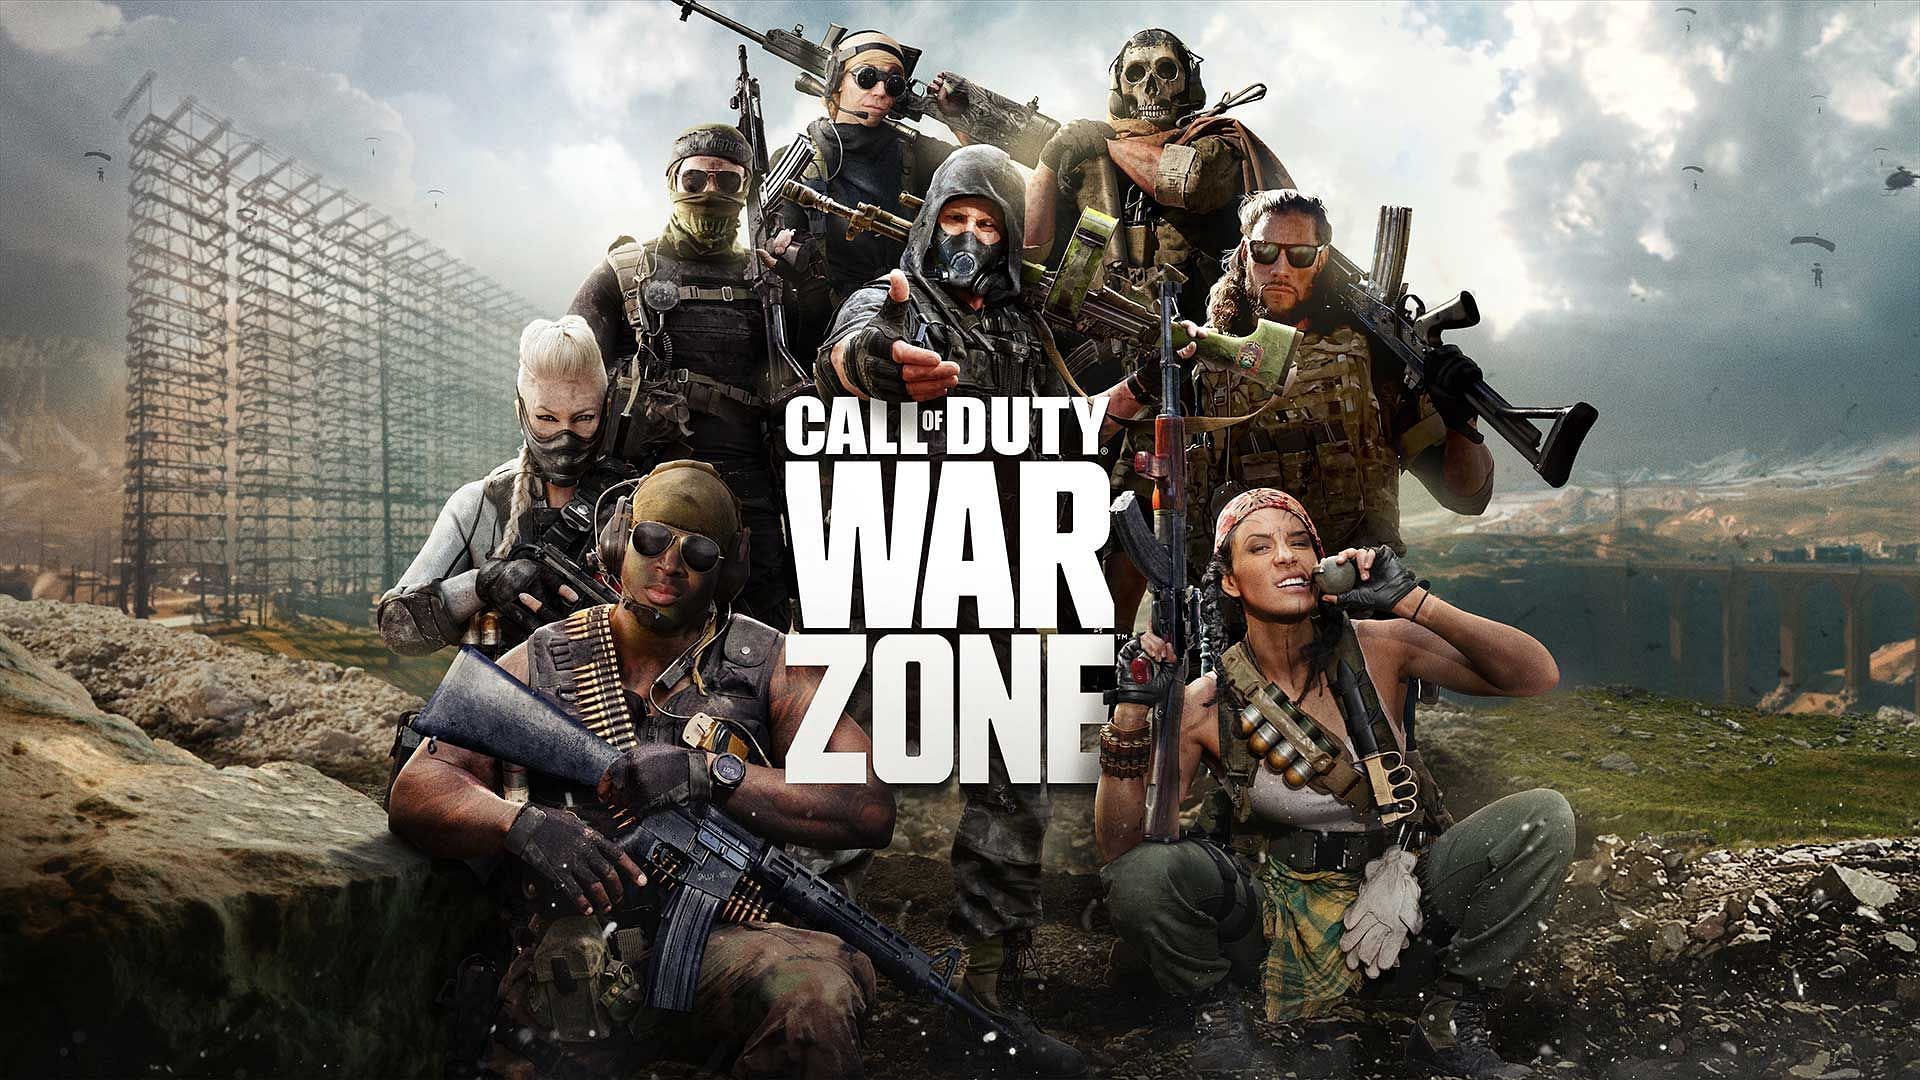 How to download and install Warzone 2 on PlayStation 